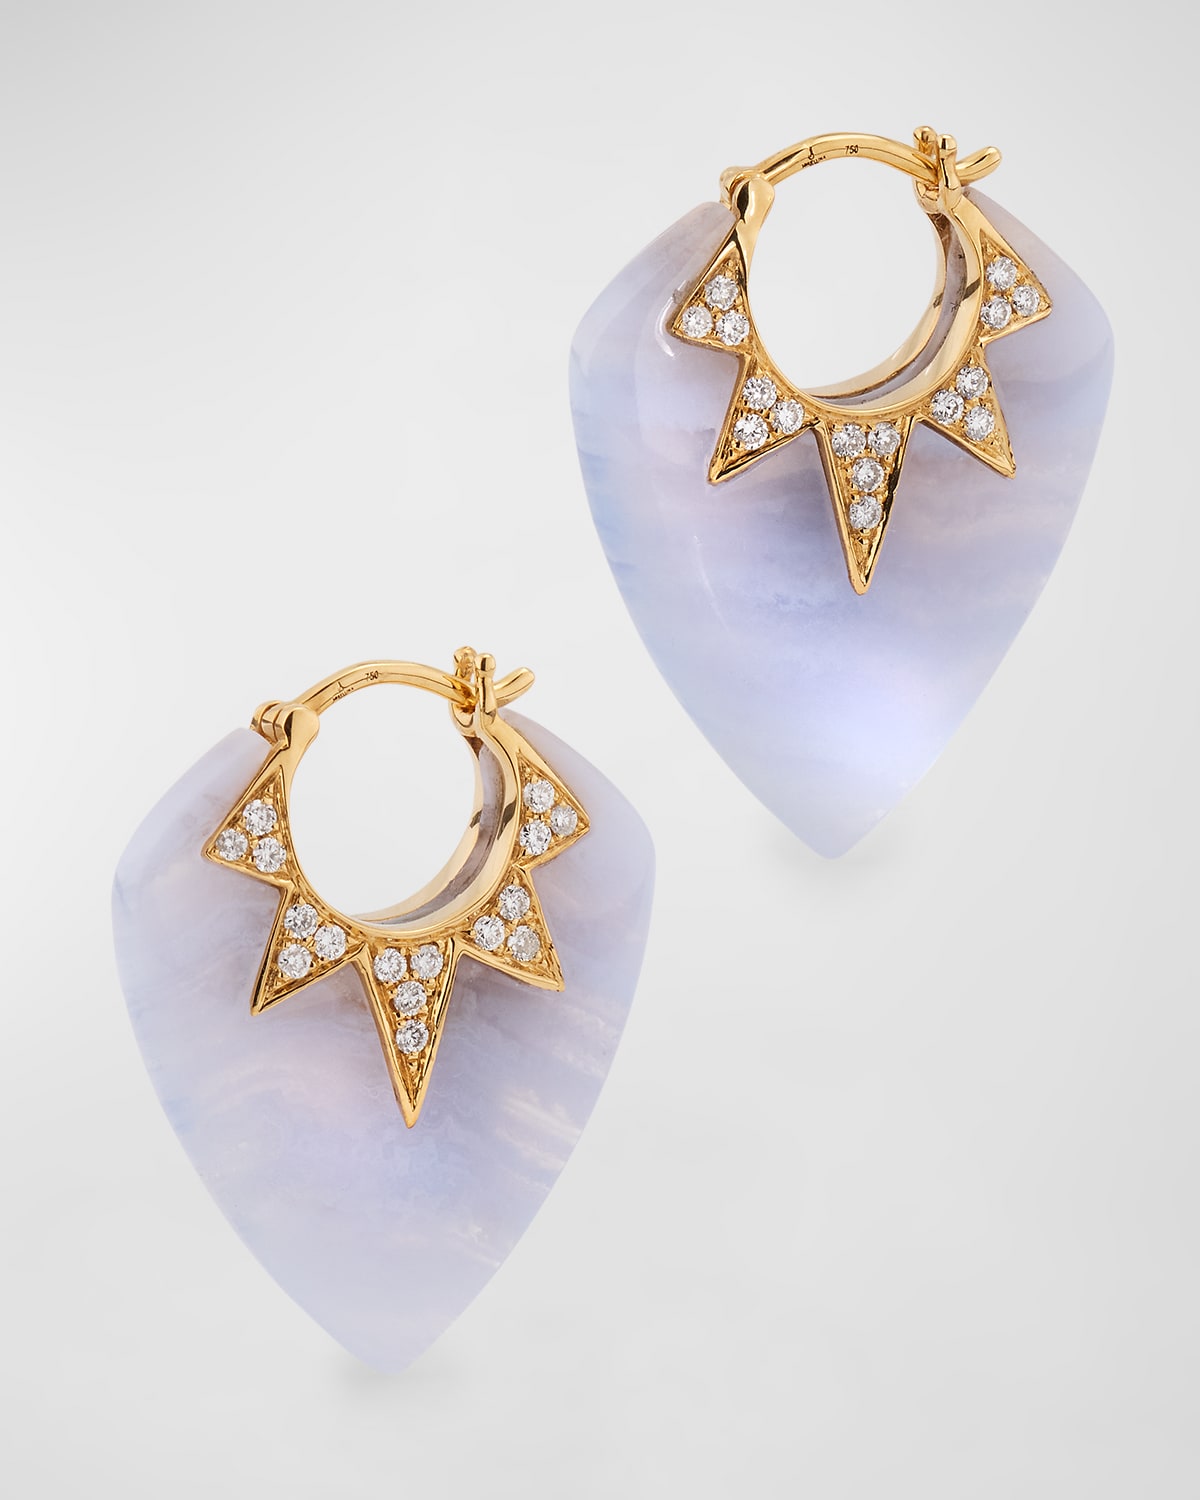 Sorellina 18k Yellow Gold Earrings With Blue Lace Agate And Gh-si Diamonds. 25x20mm In Purple